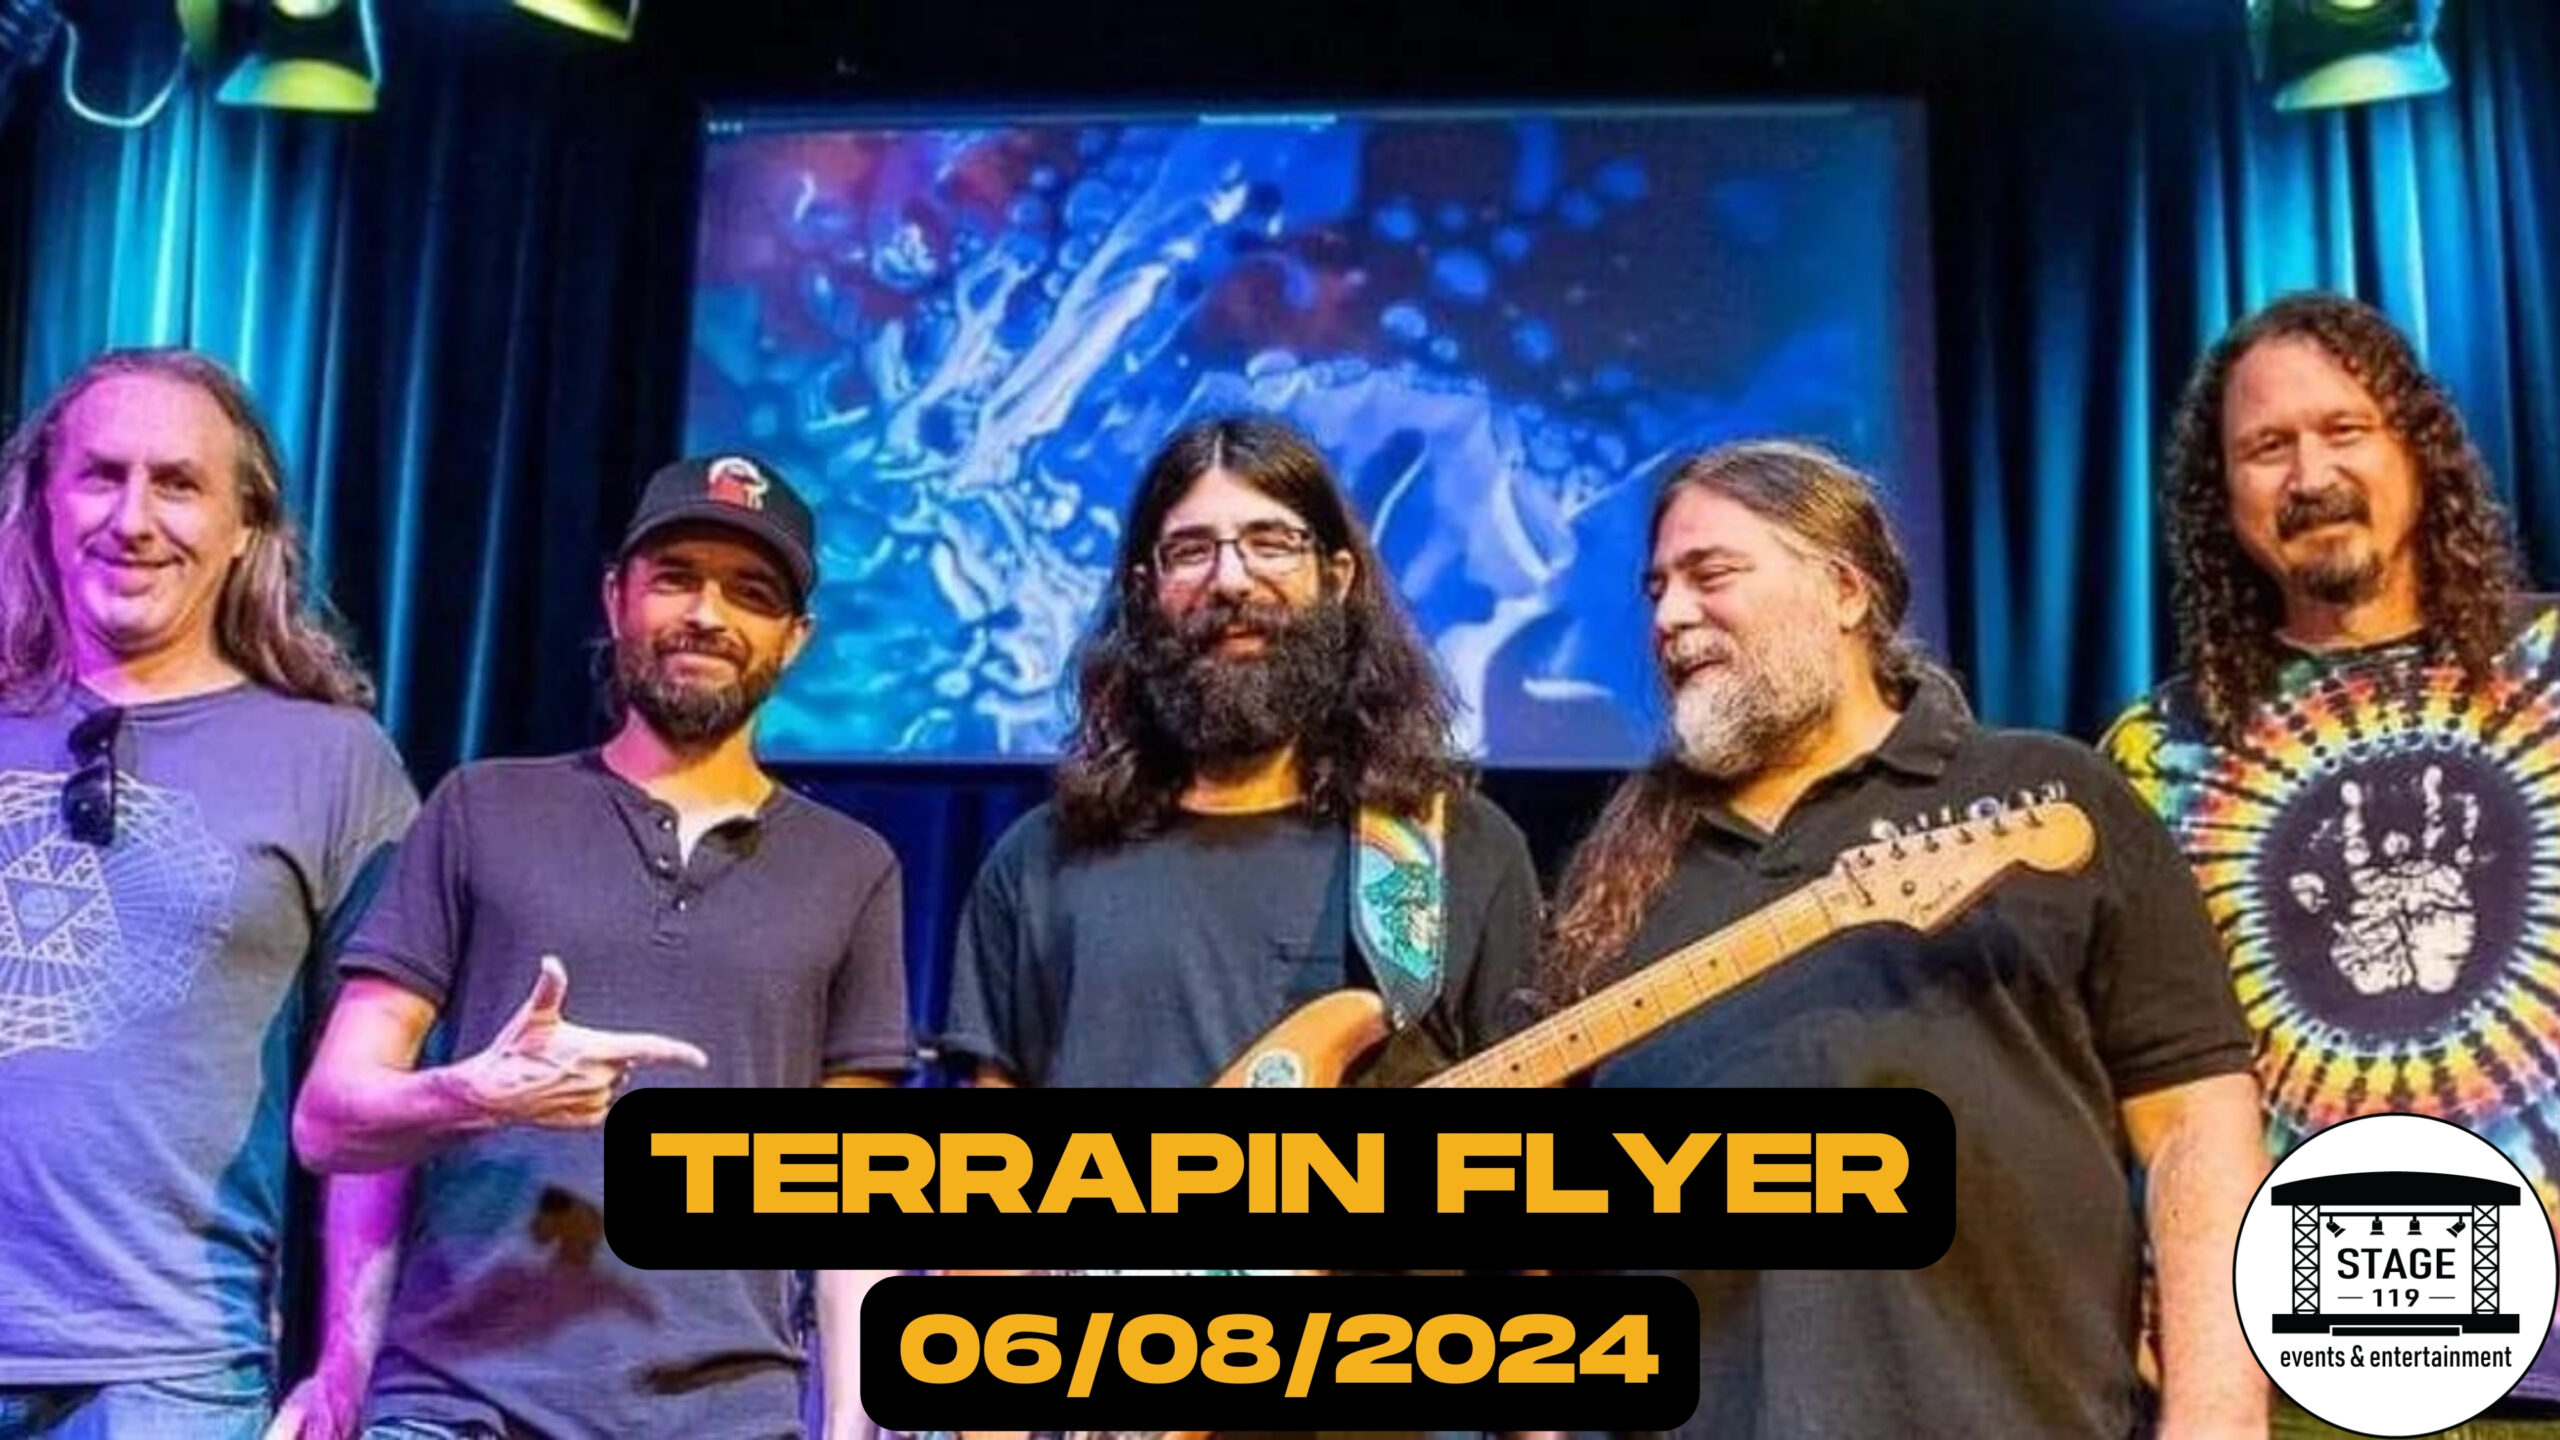 TERRAPIN FLYER at Stage 119